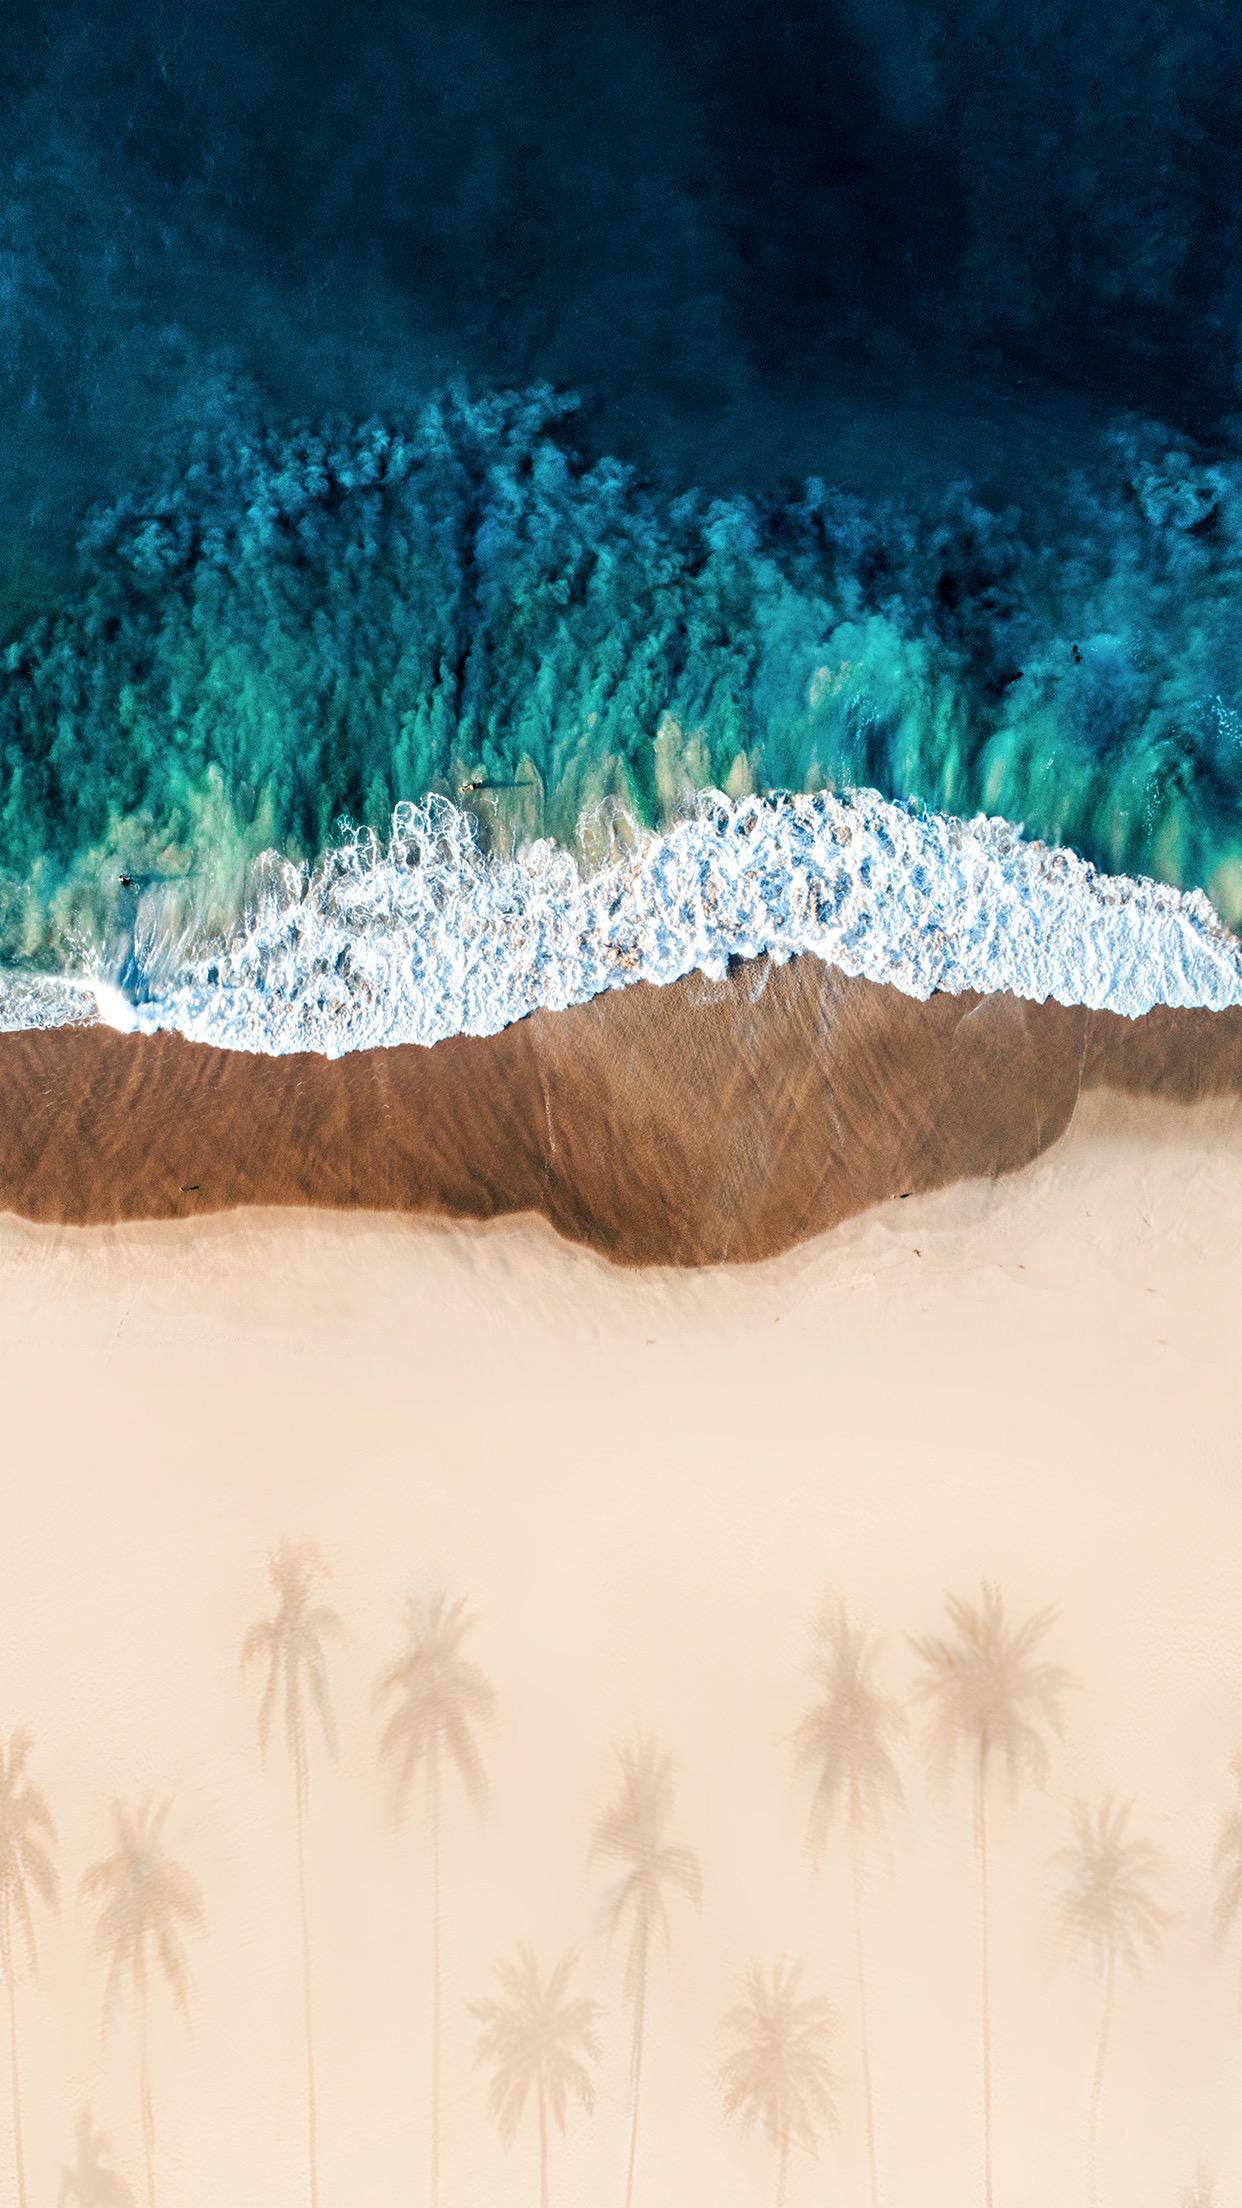 Beach Wallpaper For iPhone X And Other Devices (Ep. 6)